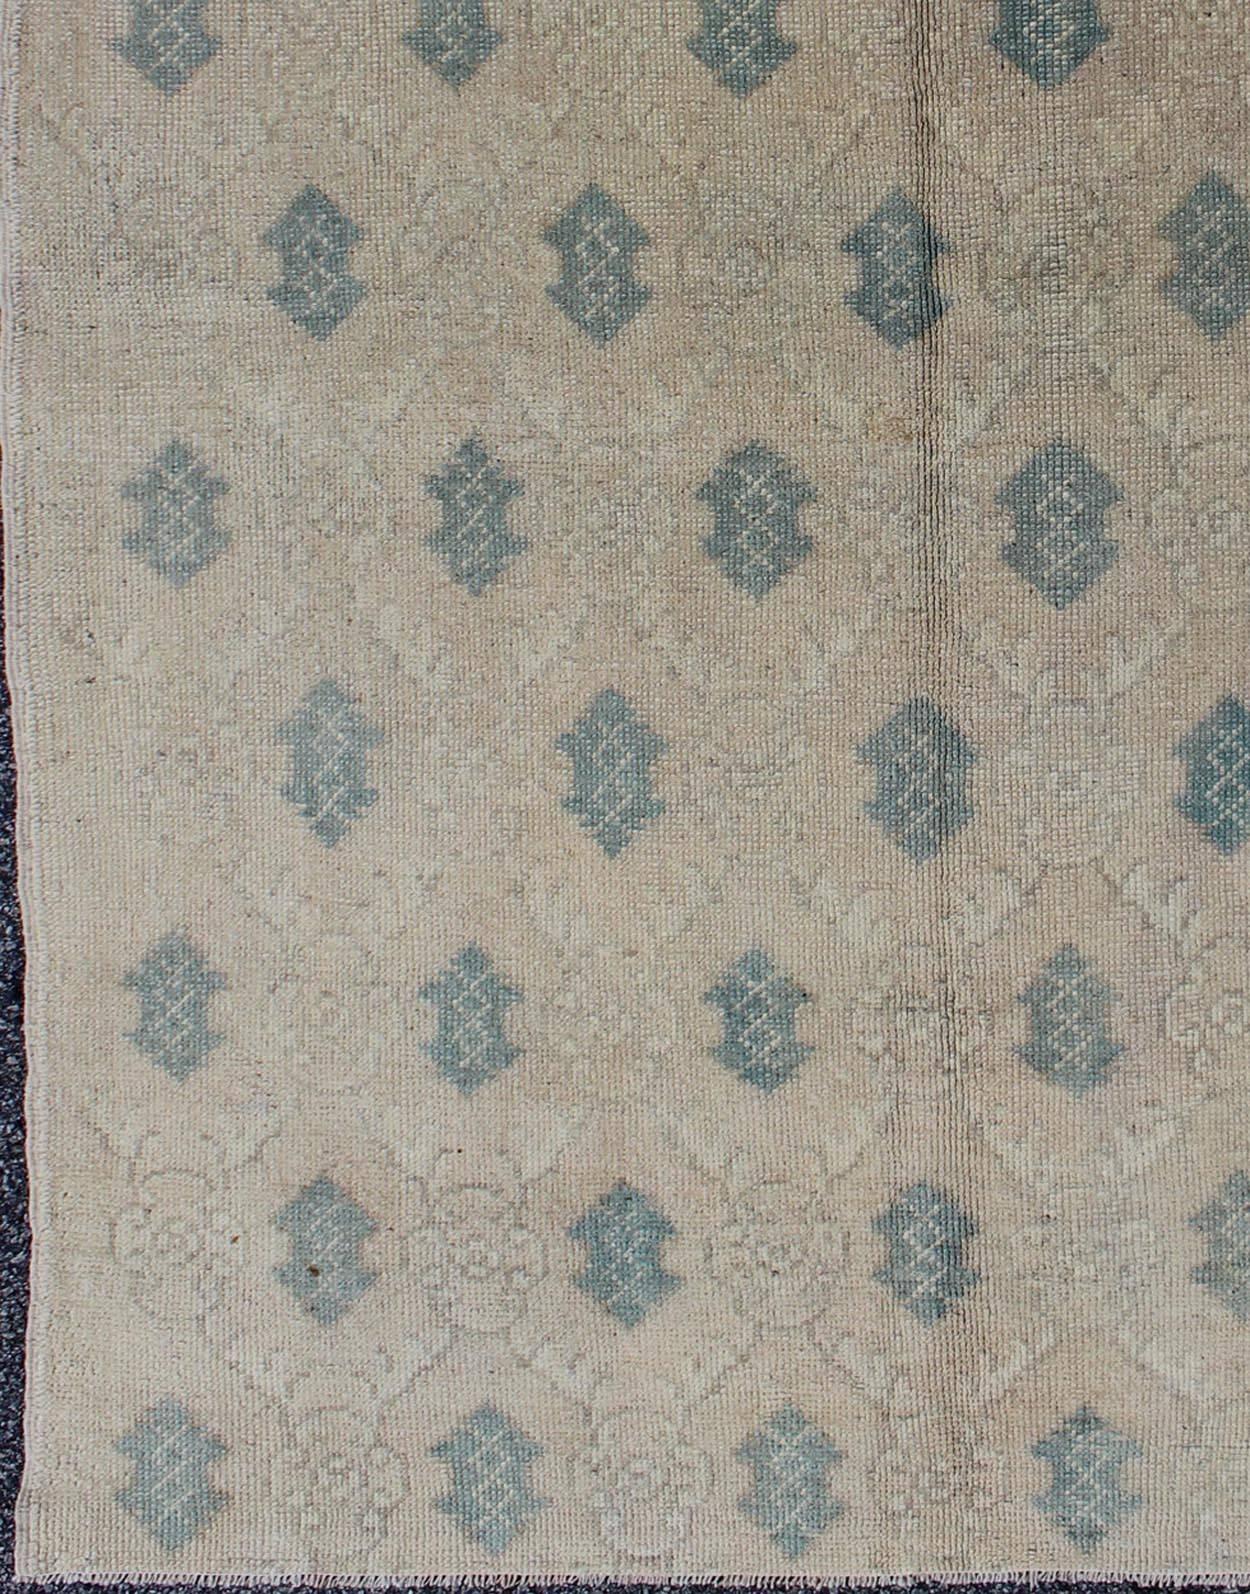 All-over design vintage Turkish Oushak rug in shades of cream and teal, rug en-912, country of origin / type: Turkey / Oushak, circa 1940

This vintage Turkish Oushak carpet (circa mid-20th century) features an all-over latticework design with